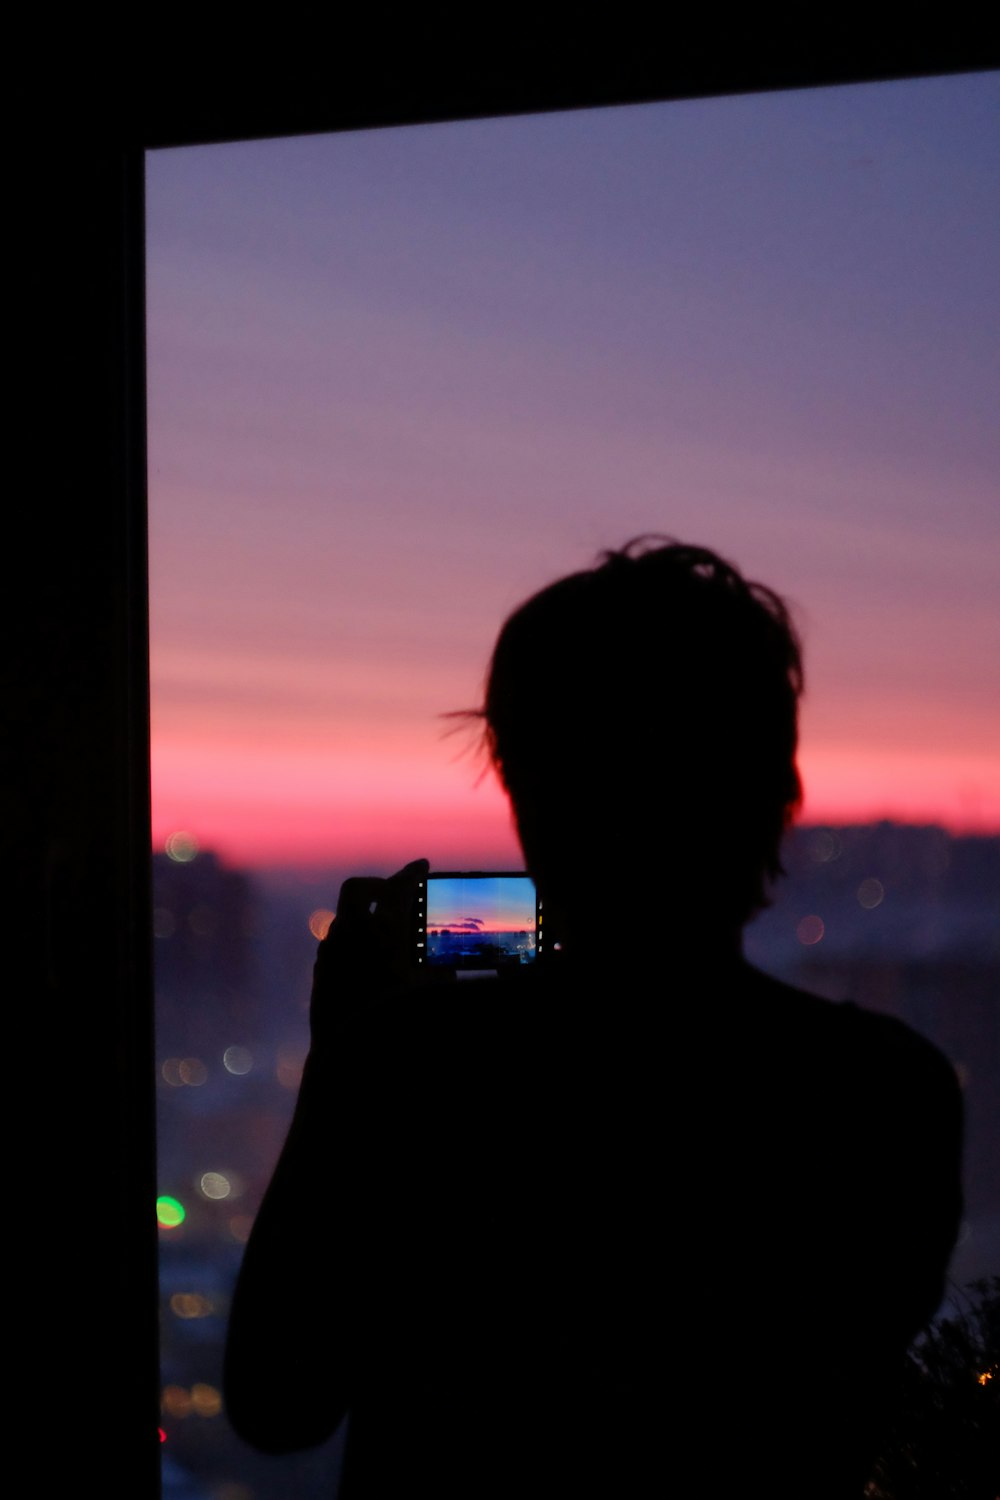 silhouette of man holding smartphone during sunset